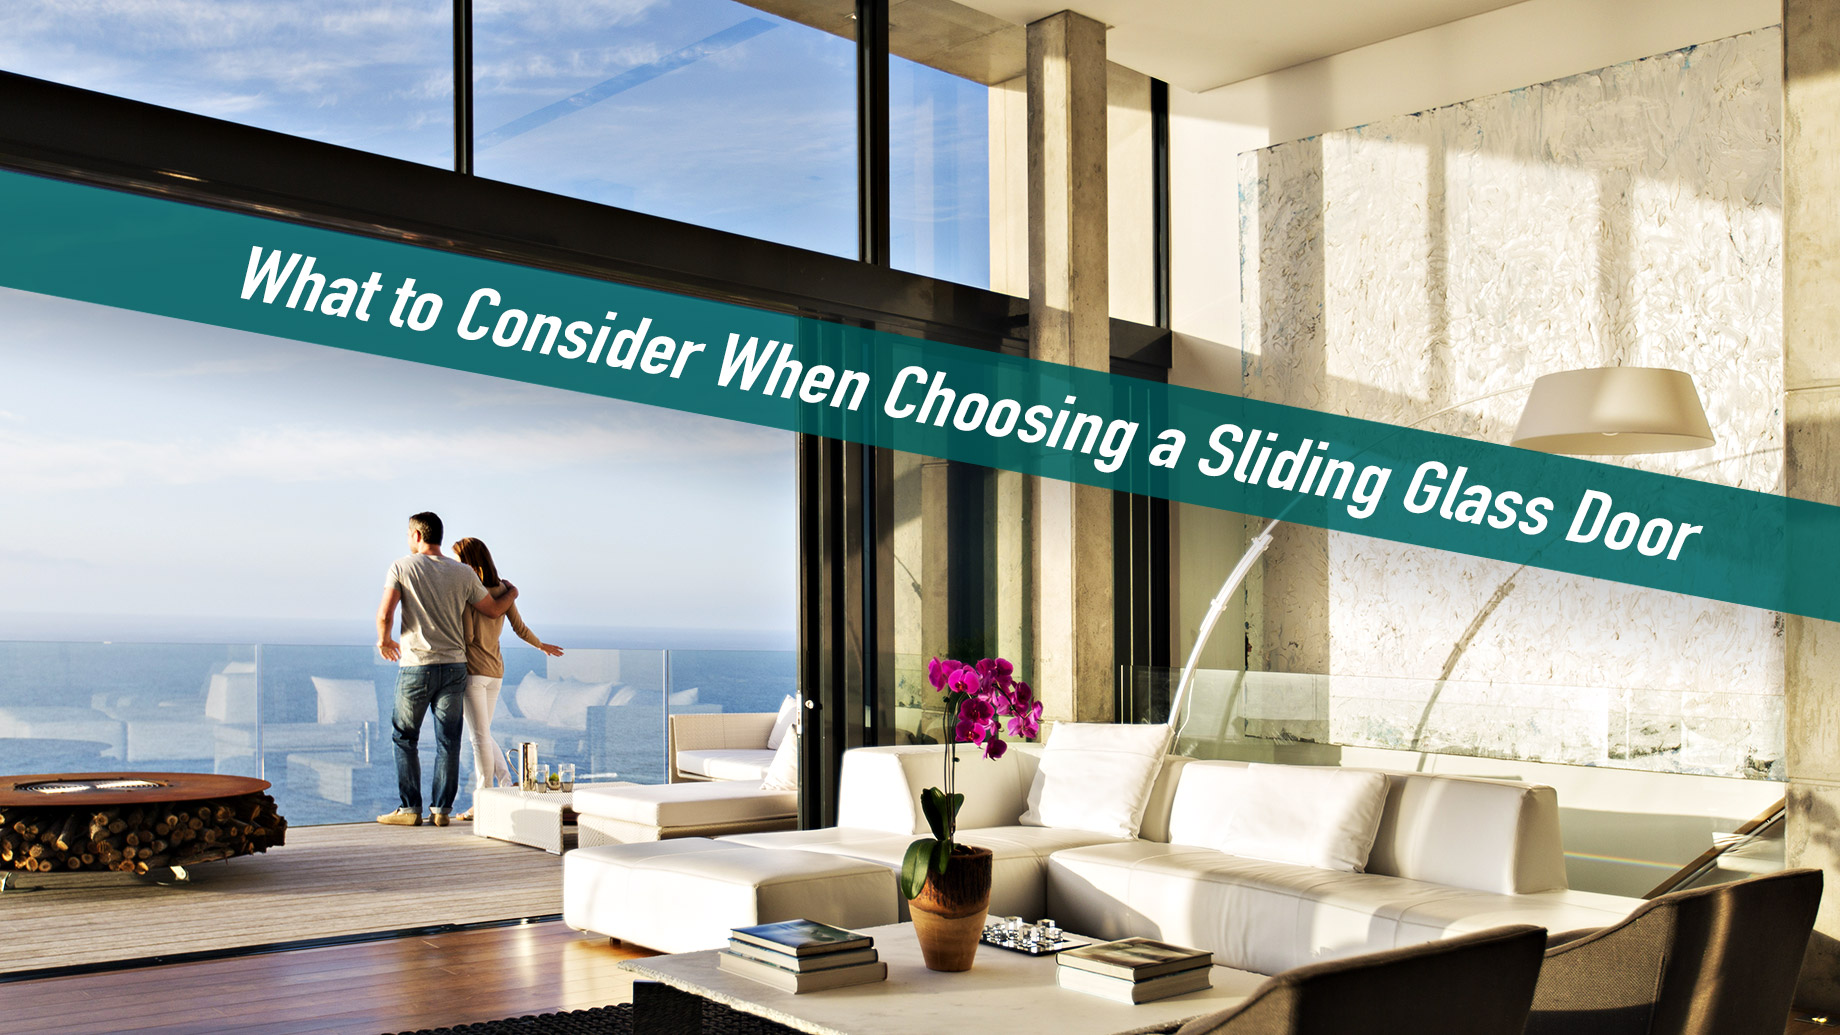 What to Consider When Choosing a Sliding Glass Door